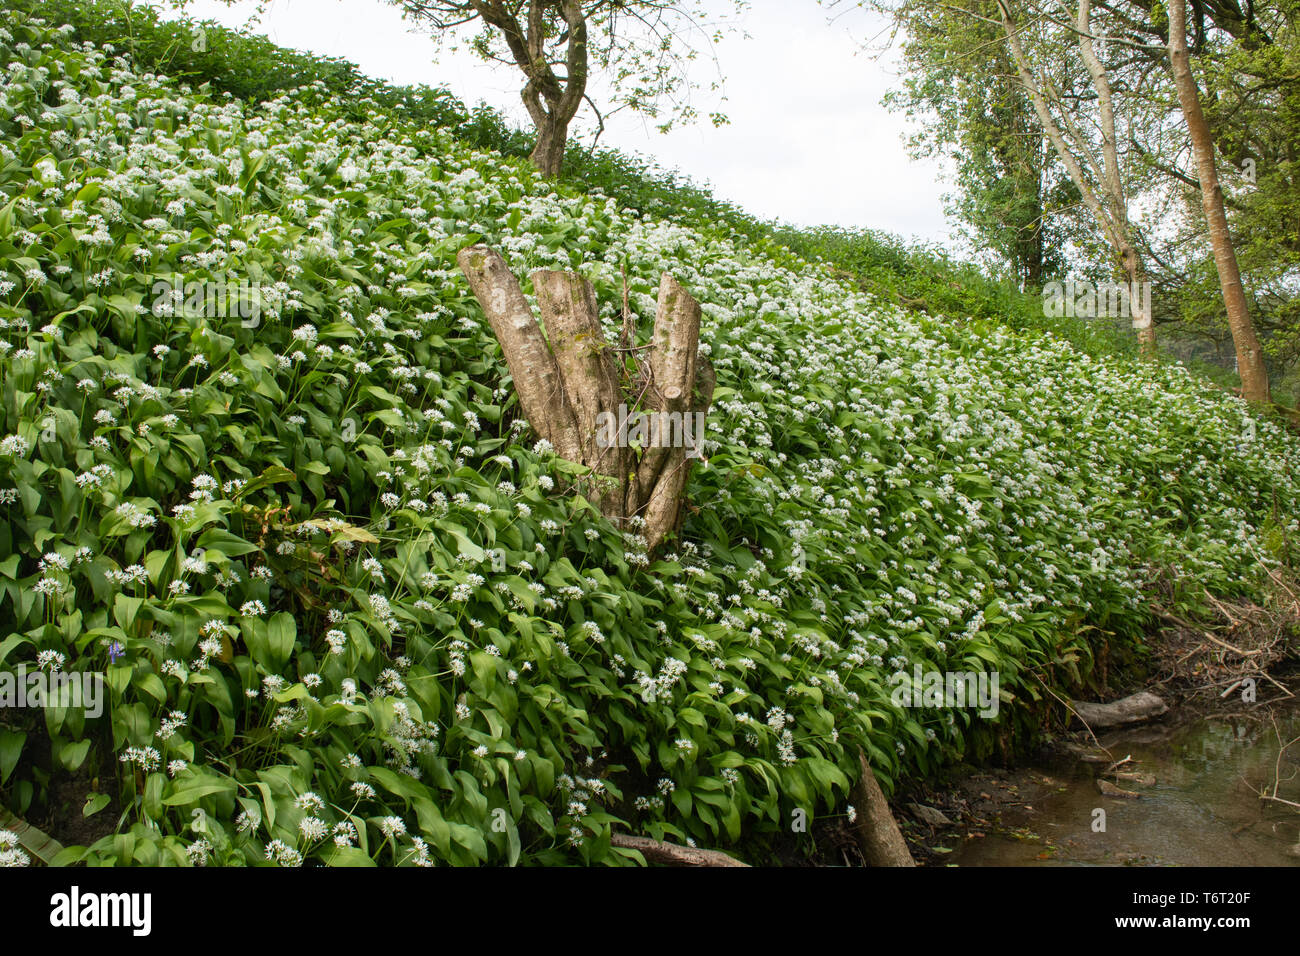 Wild garlic, also called ramsons or buckrams (Allium ursinum) wildflowers in Hampshire woodland countryside during early May or Spring Stock Photo